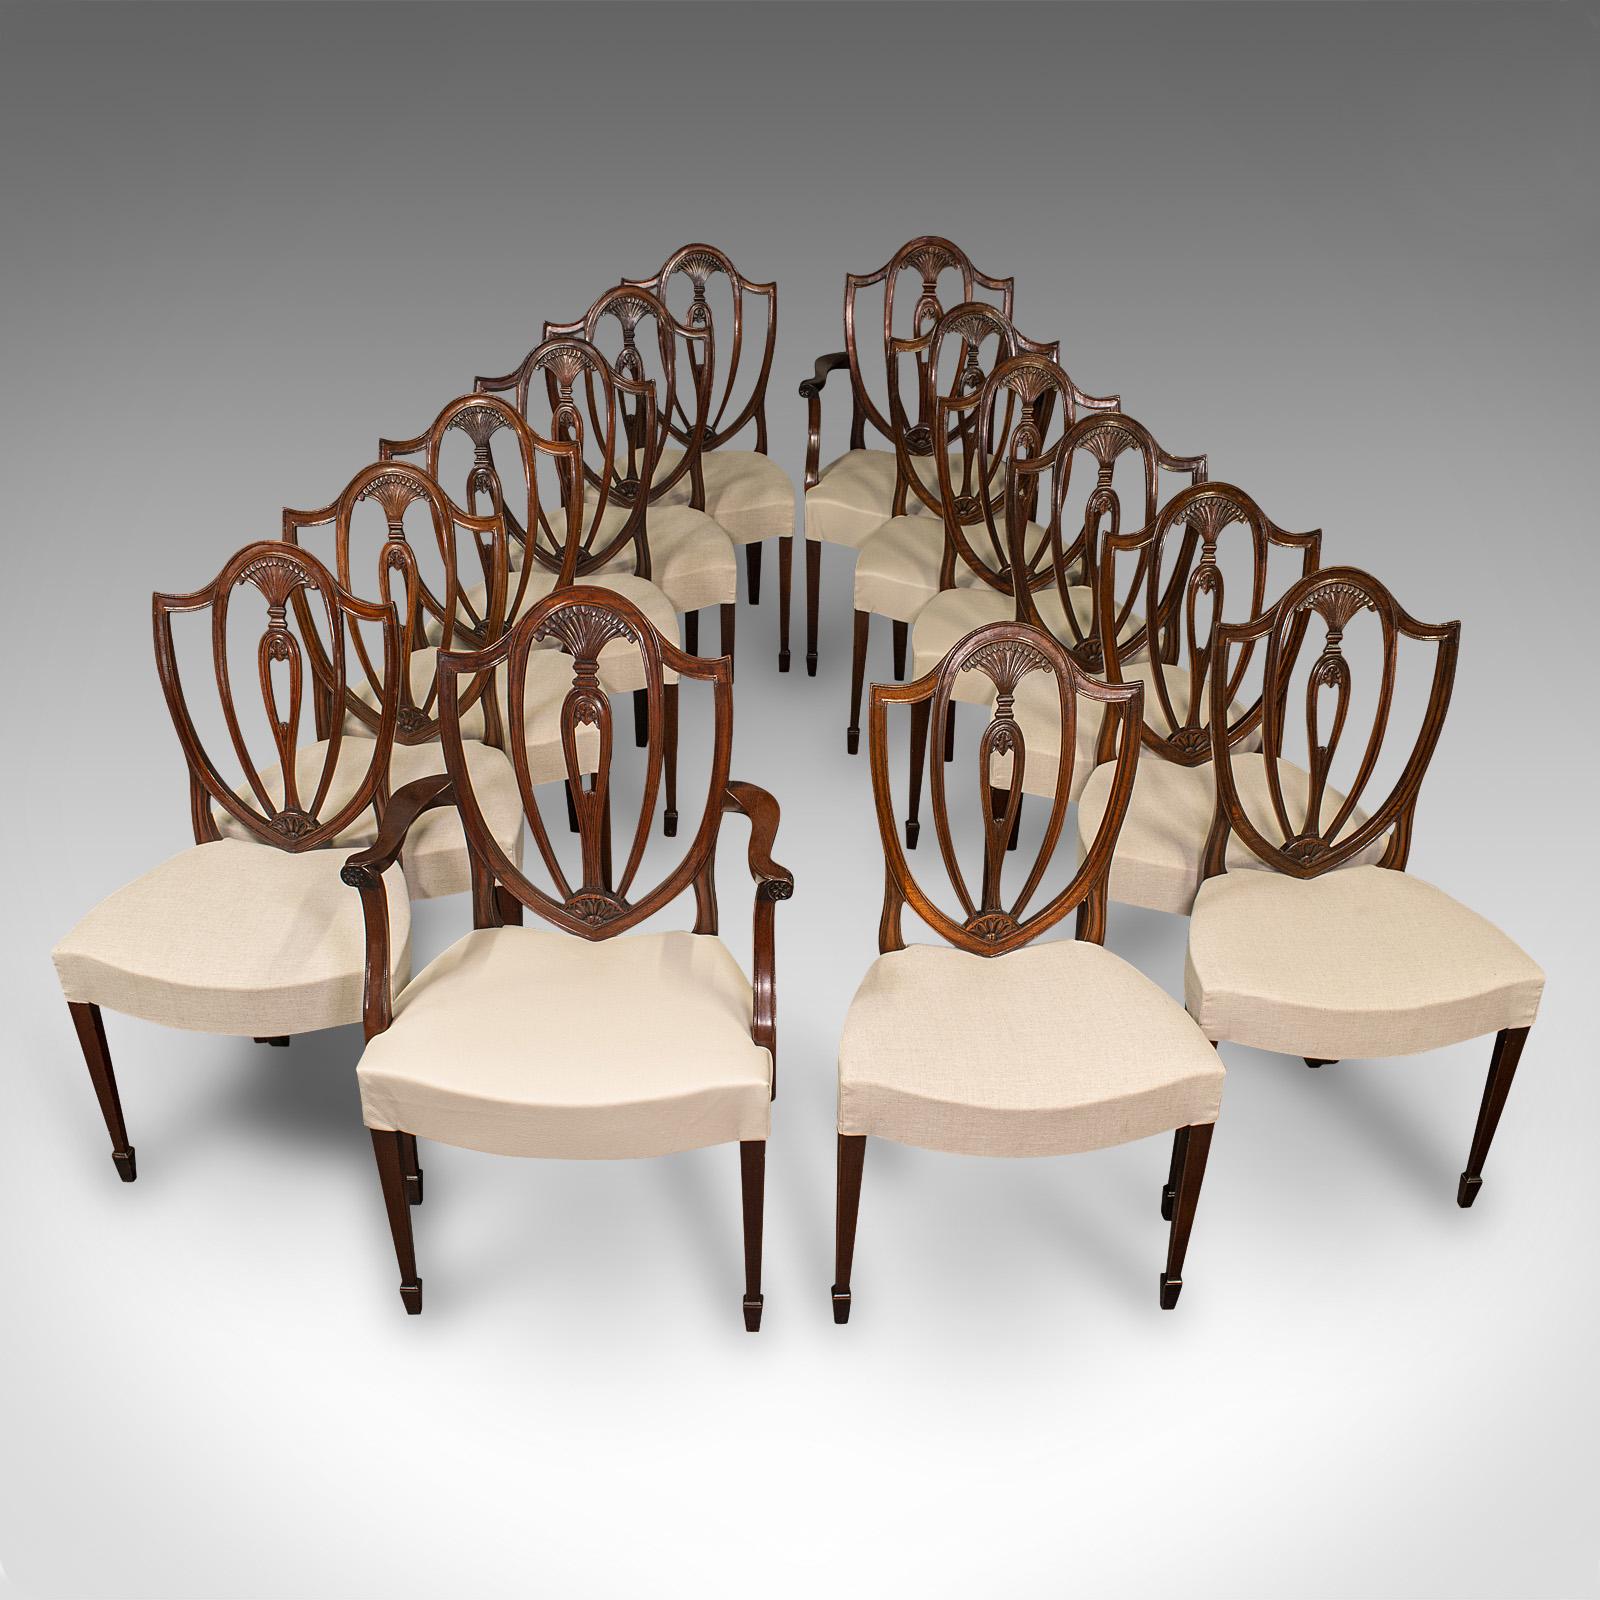 Long Set of 14 Antique Dining Chairs, English, Chippendale Revival, Victorian 2